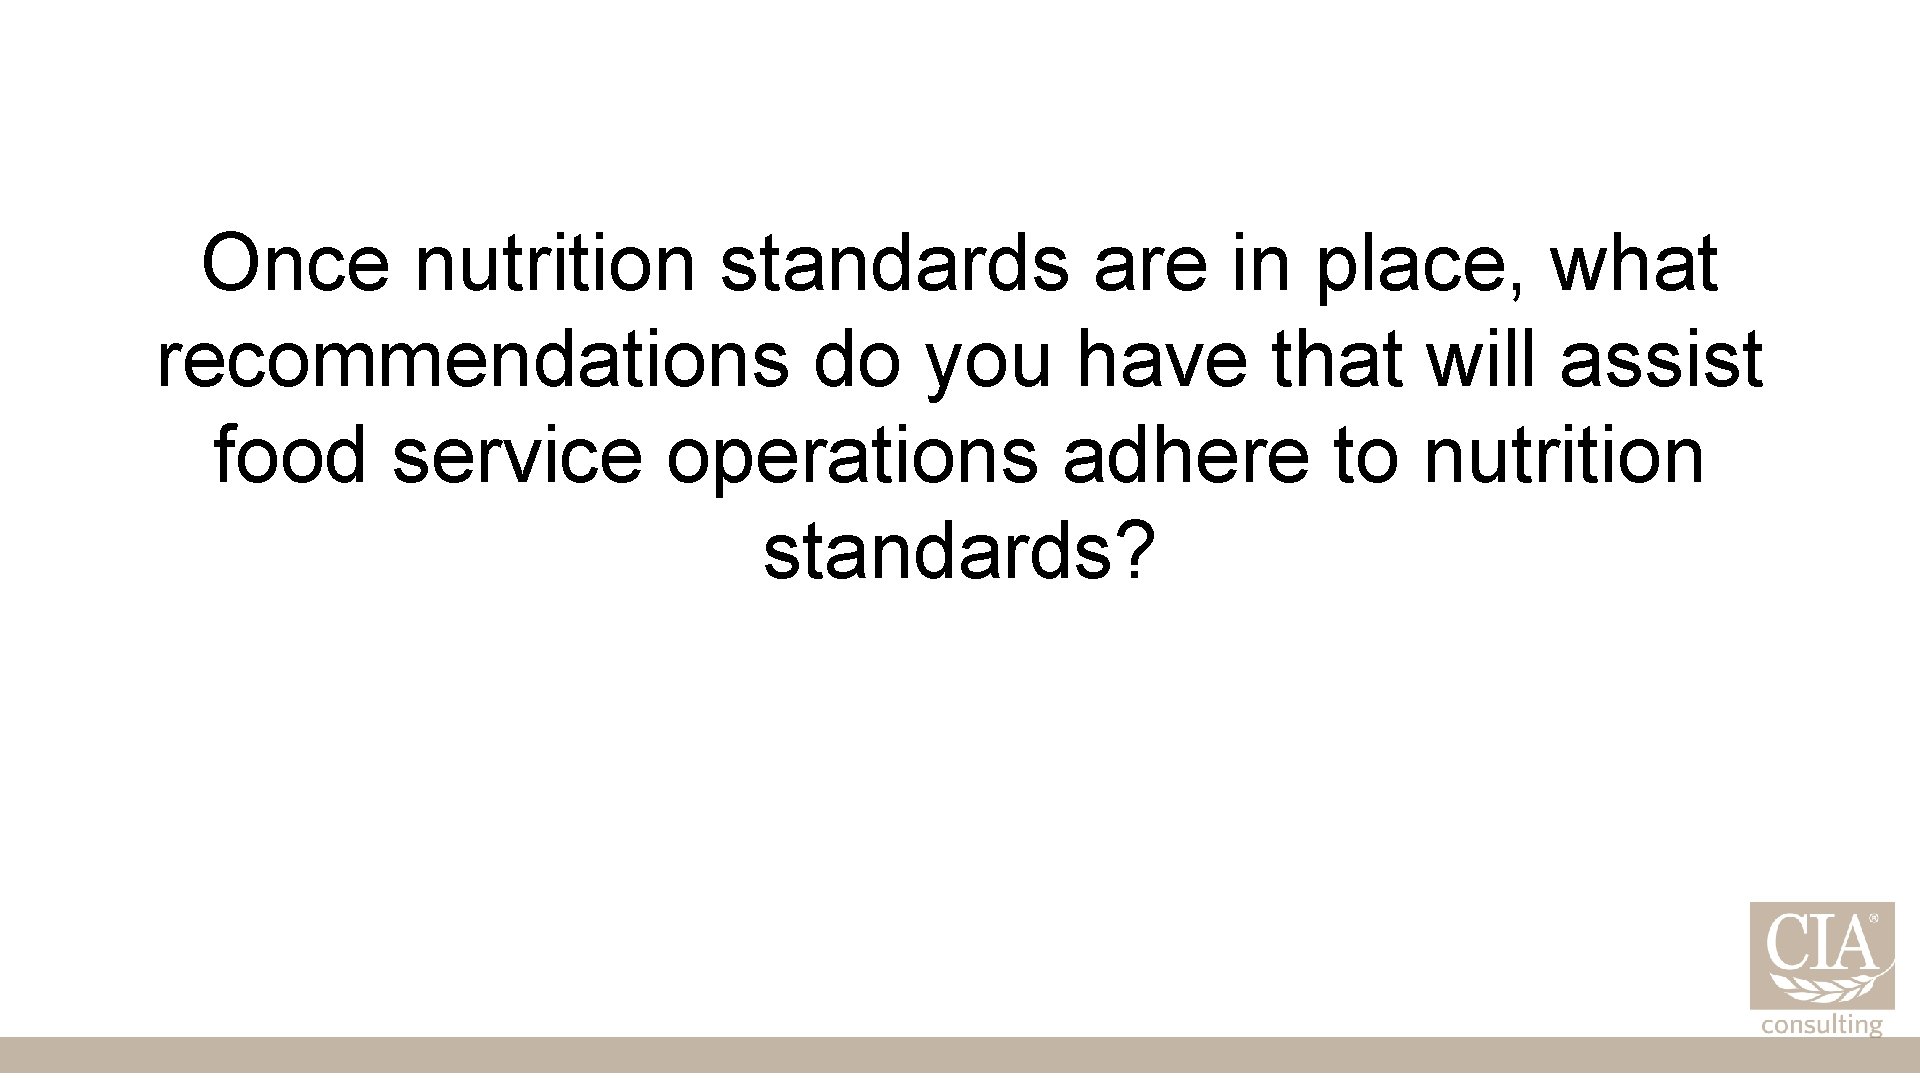 Once nutrition standards are in place, what recommendations do you have that will assist